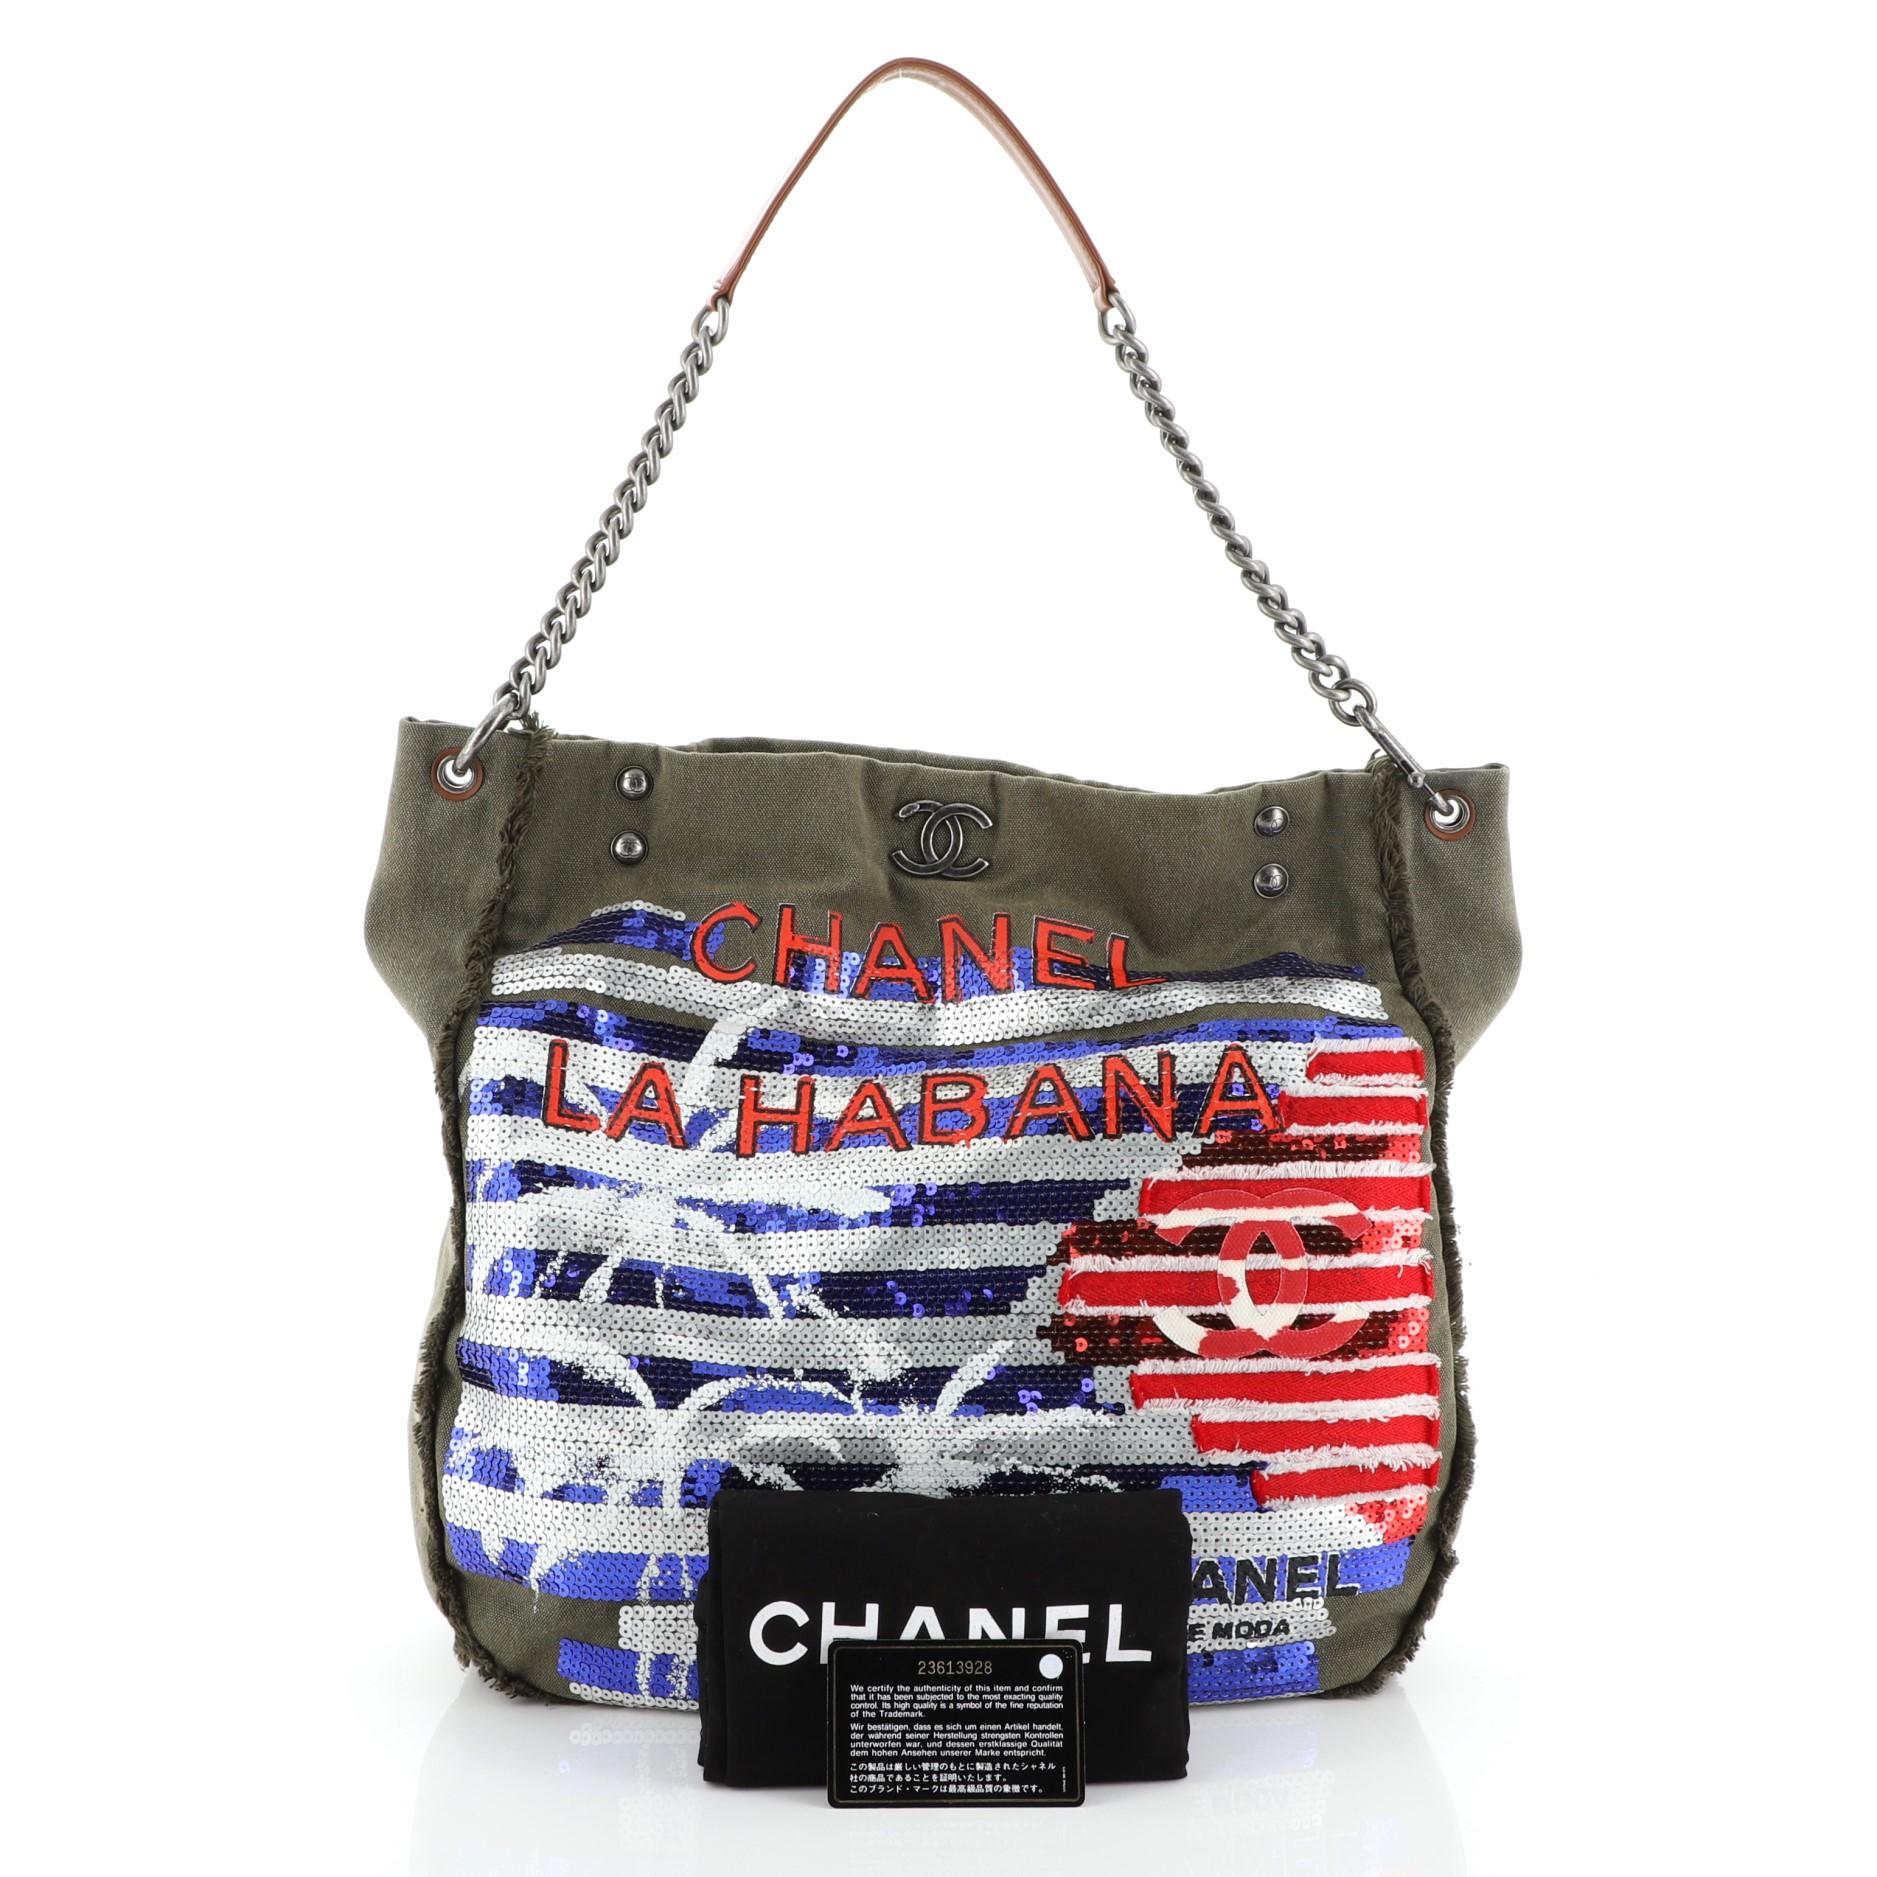 This Chanel Cuba La Habana Chain Hobo Sequin Embellished Canvas Large, crafted from green sequin embellished canvas, features CC logo at front, chain link shoulder strap, and aged silver-tone hardware. Its magnetic snap button closure opens to a